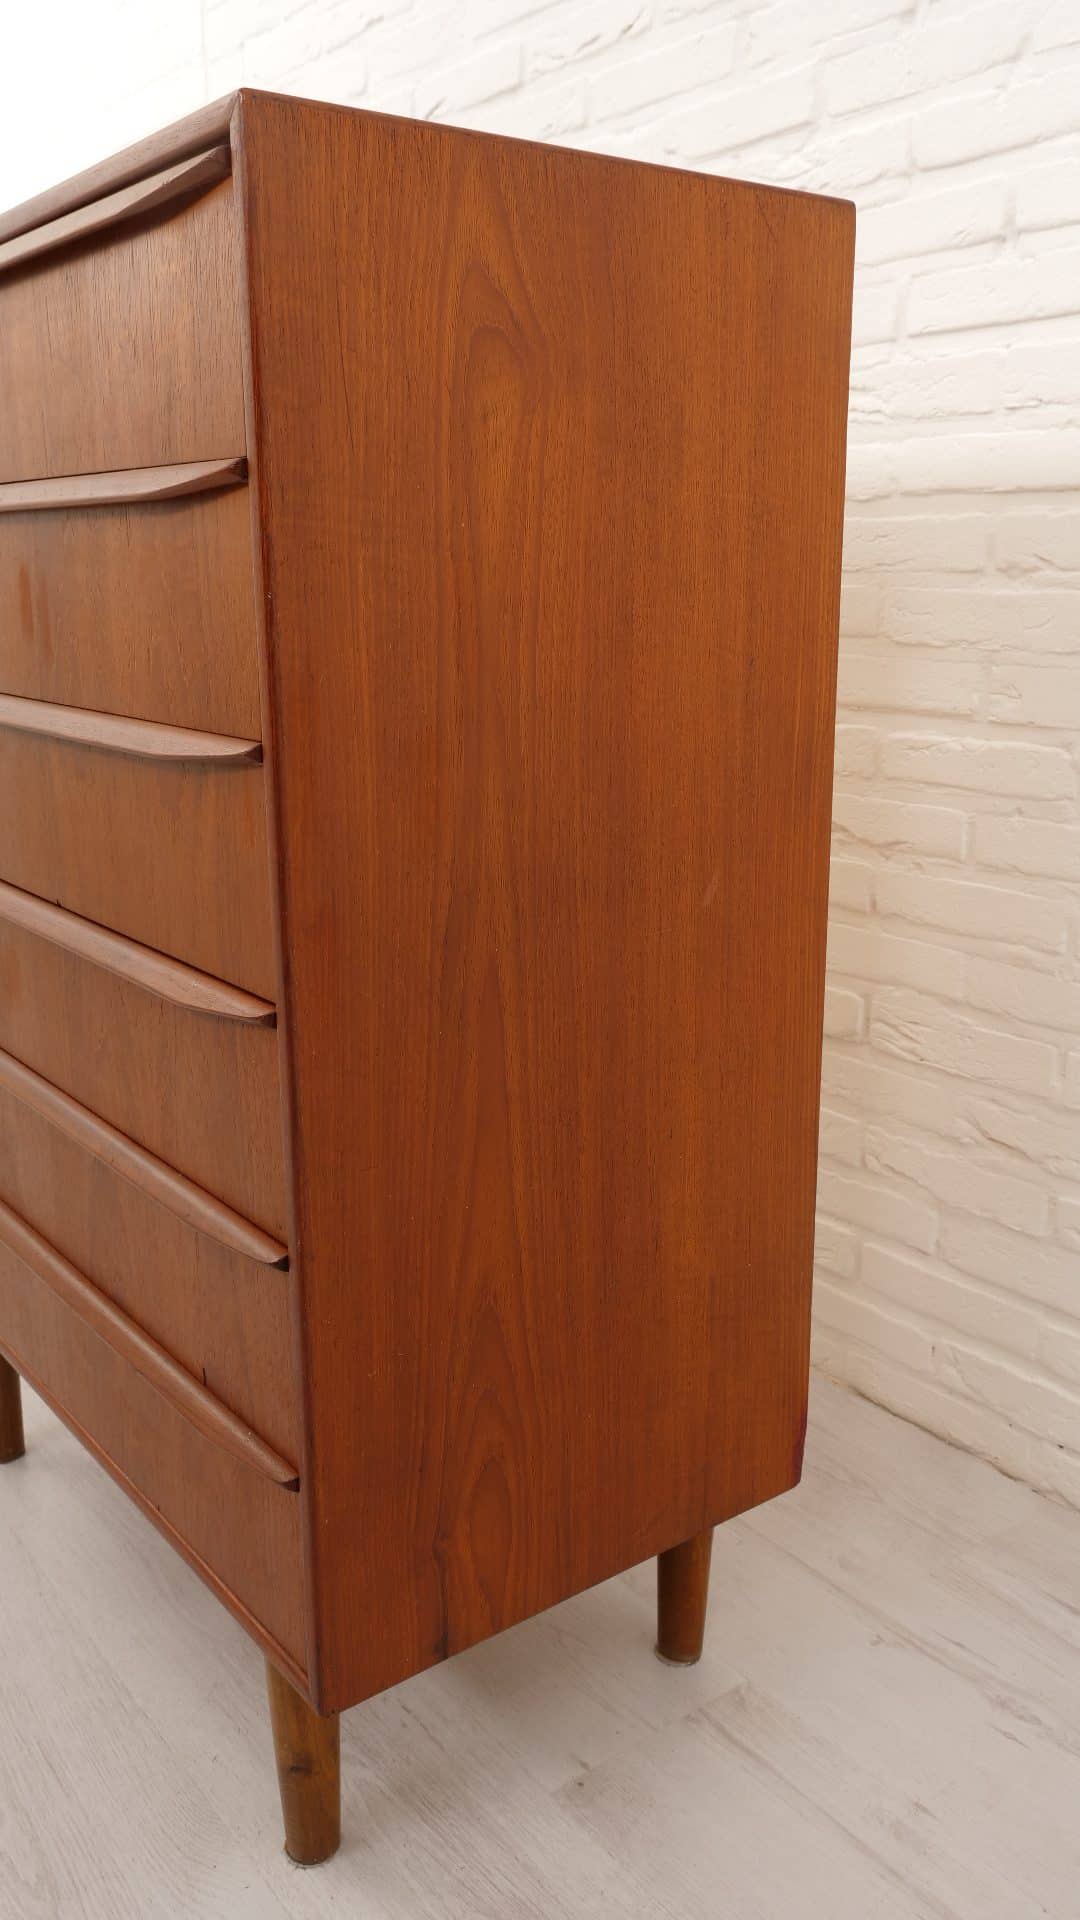 Trp Post Container Data Trp Post Id 6117 Drawer Cabinet Danish Design Teak 6 Drawers Trp Post Container